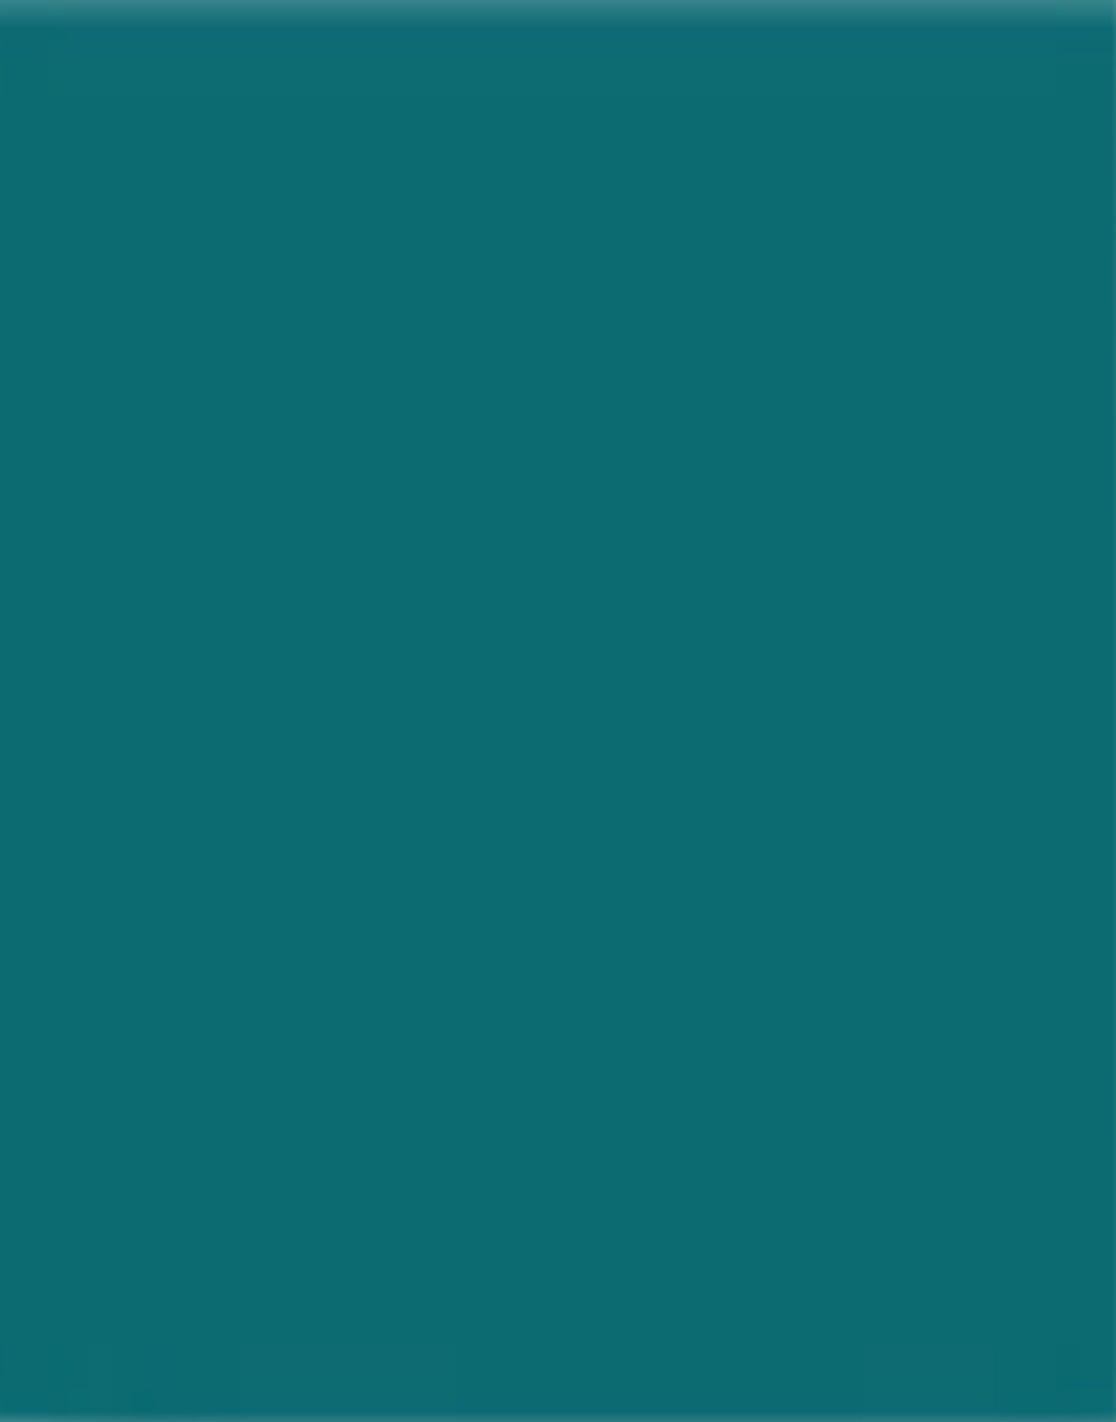 Teal Teal Colors And Google Search On Pinterest Effy Moom Free Coloring Picture wallpaper give a chance to color on the wall without getting in trouble! Fill the walls of your home or office with stress-relieving [effymoom.blogspot.com]